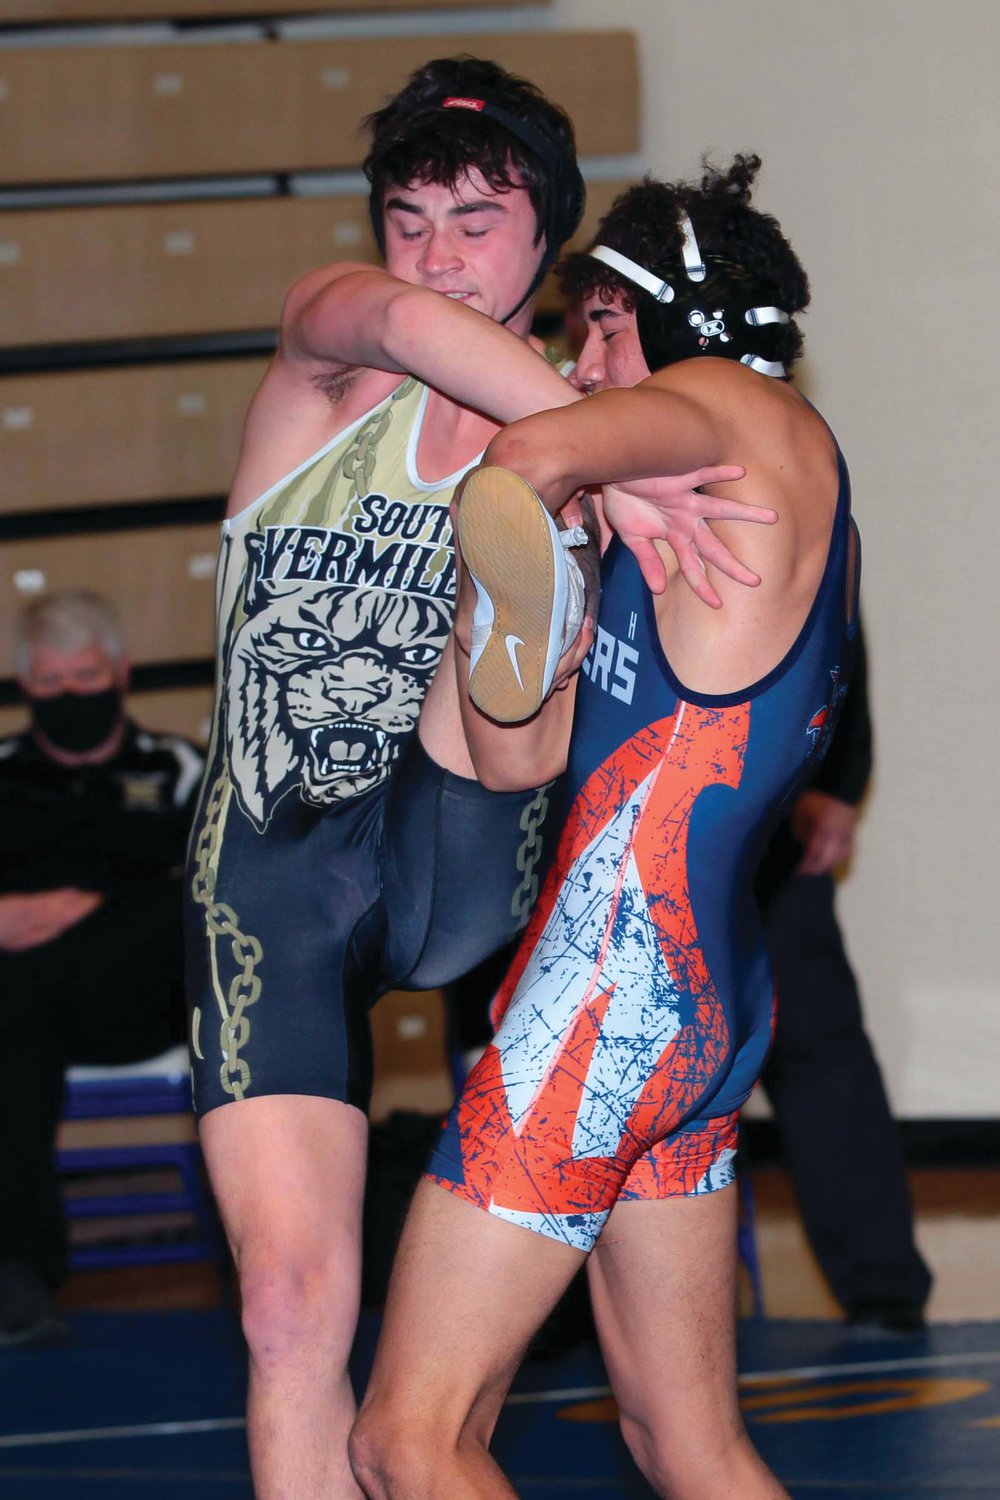 James McClerkin of North Montgomery wrestling Koltin Kabbany of South Vermillion at 145 lbs.  .